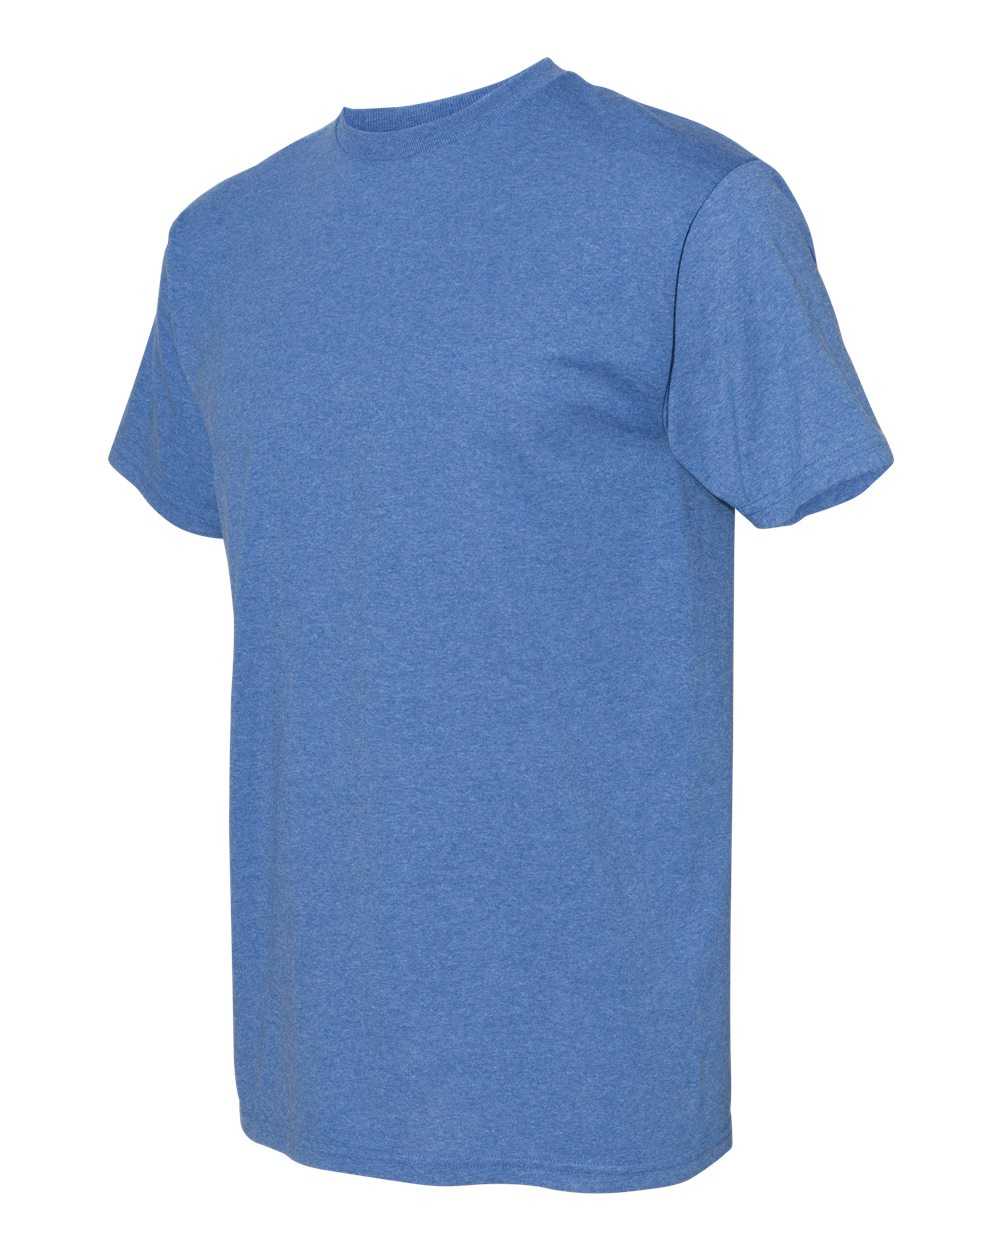 American Apparel 1701 Midweight Cotton Unisex T-Shirt - Royal Heather - HIT a Double